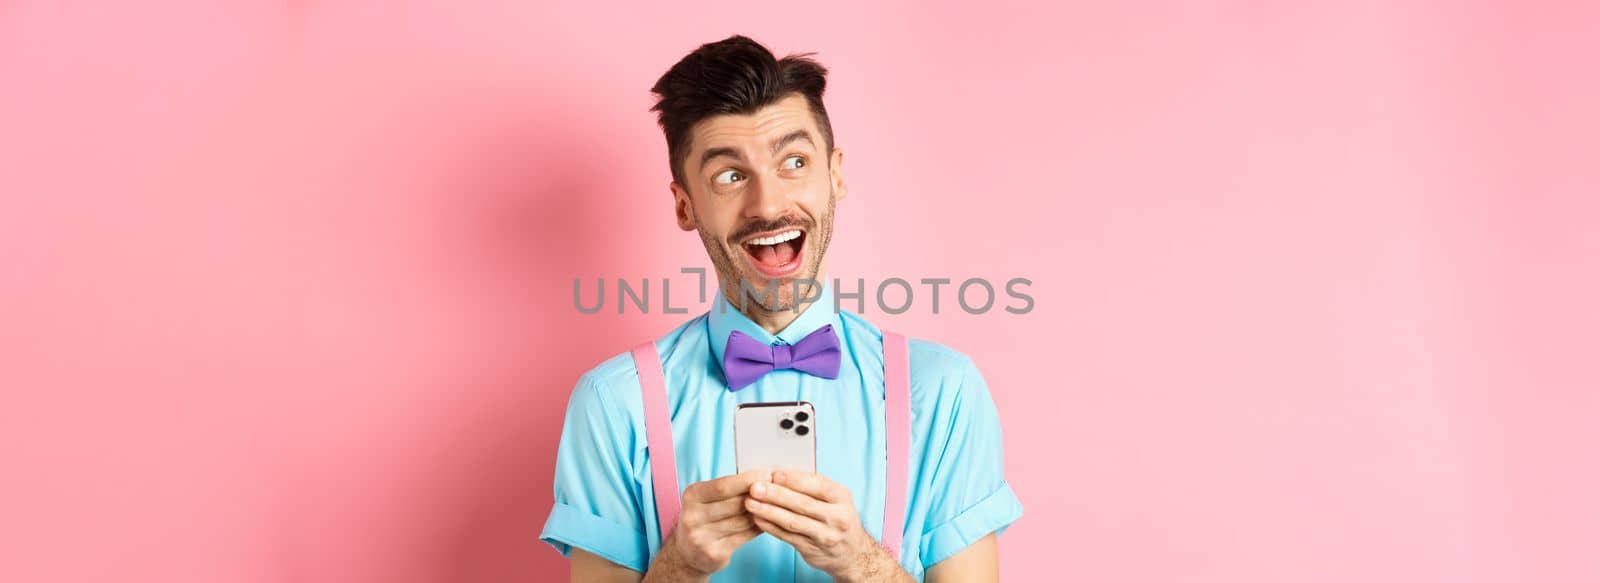 Technology concept. Excited man looking aside with dreamy face, winning online prize on smartphone, standing cheerful over pink background.